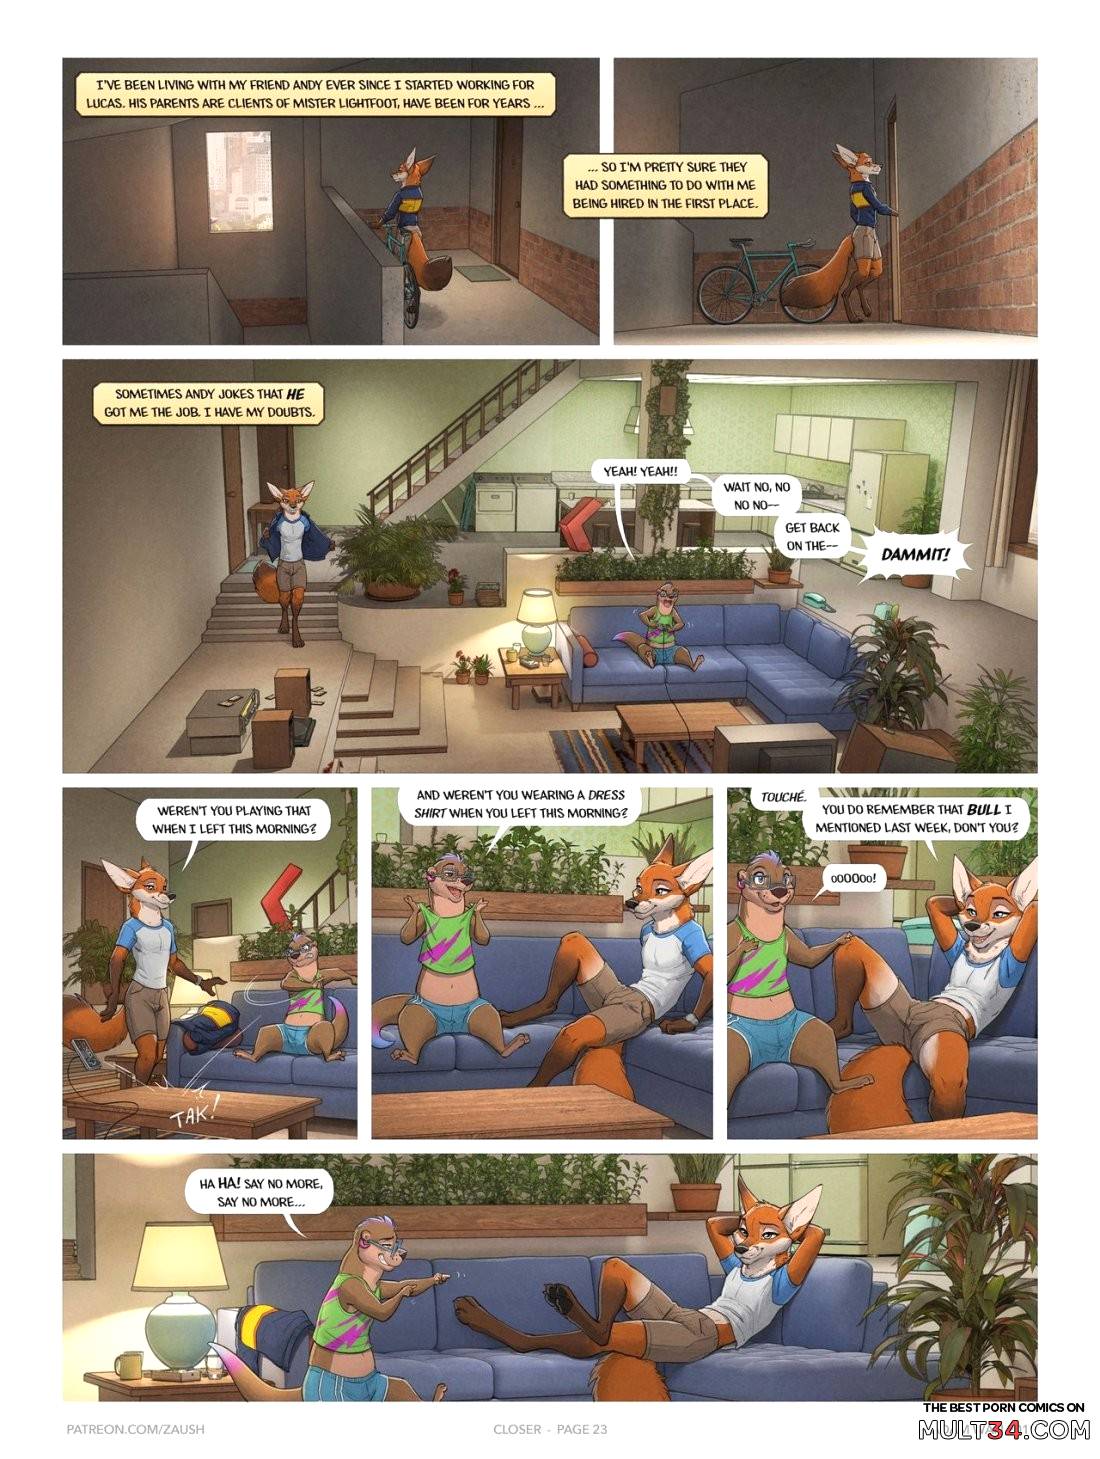 Closer page 23